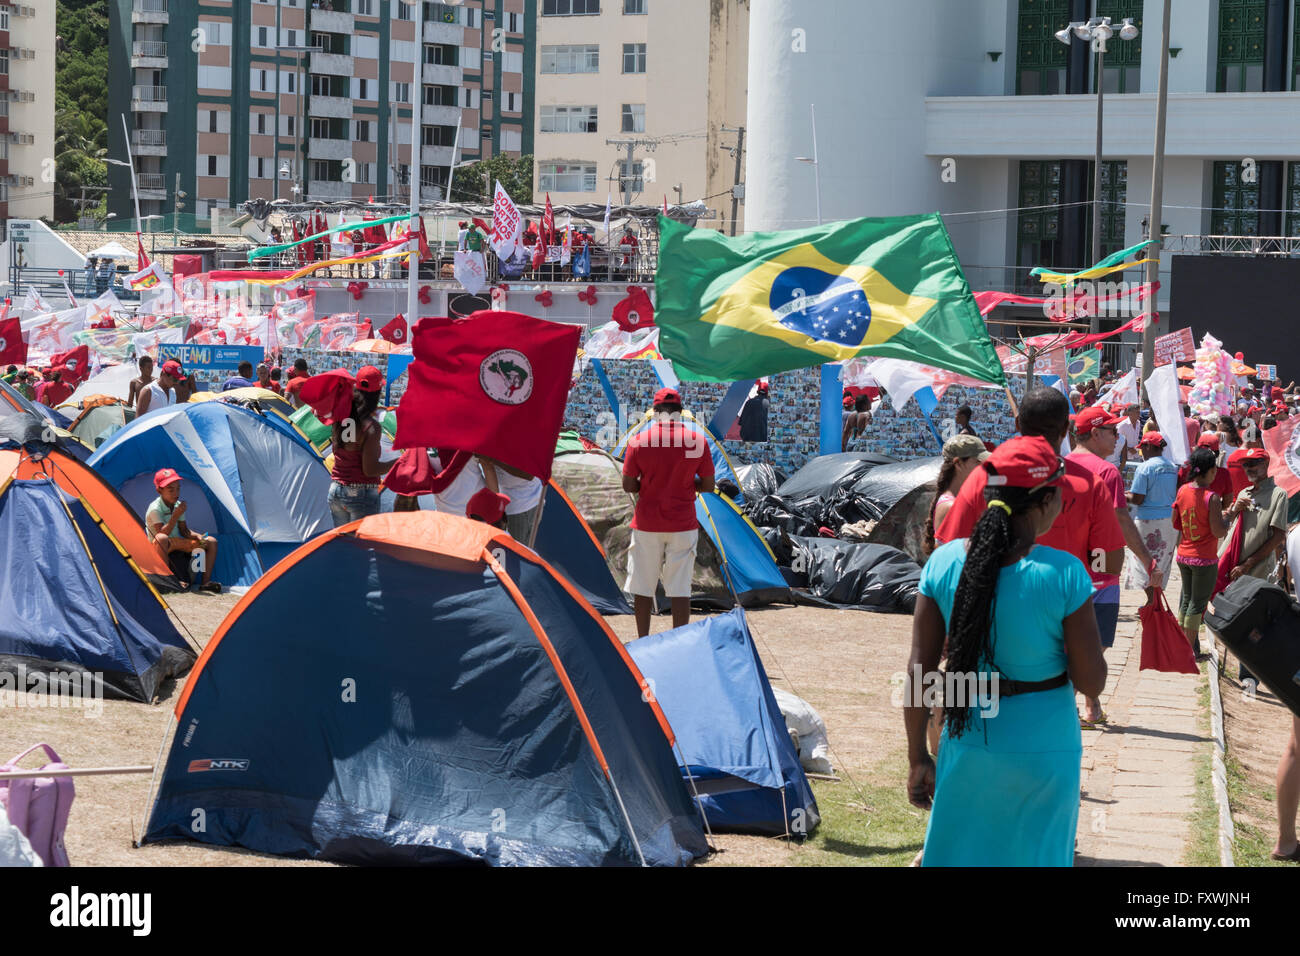 Salvador, Bahia, Brazil. 17th April, 2016. protest against the impeachment of Brazil's President Dilma Rousseff. Credit:  Andrew Kemp/Alamy Live News Stock Photo